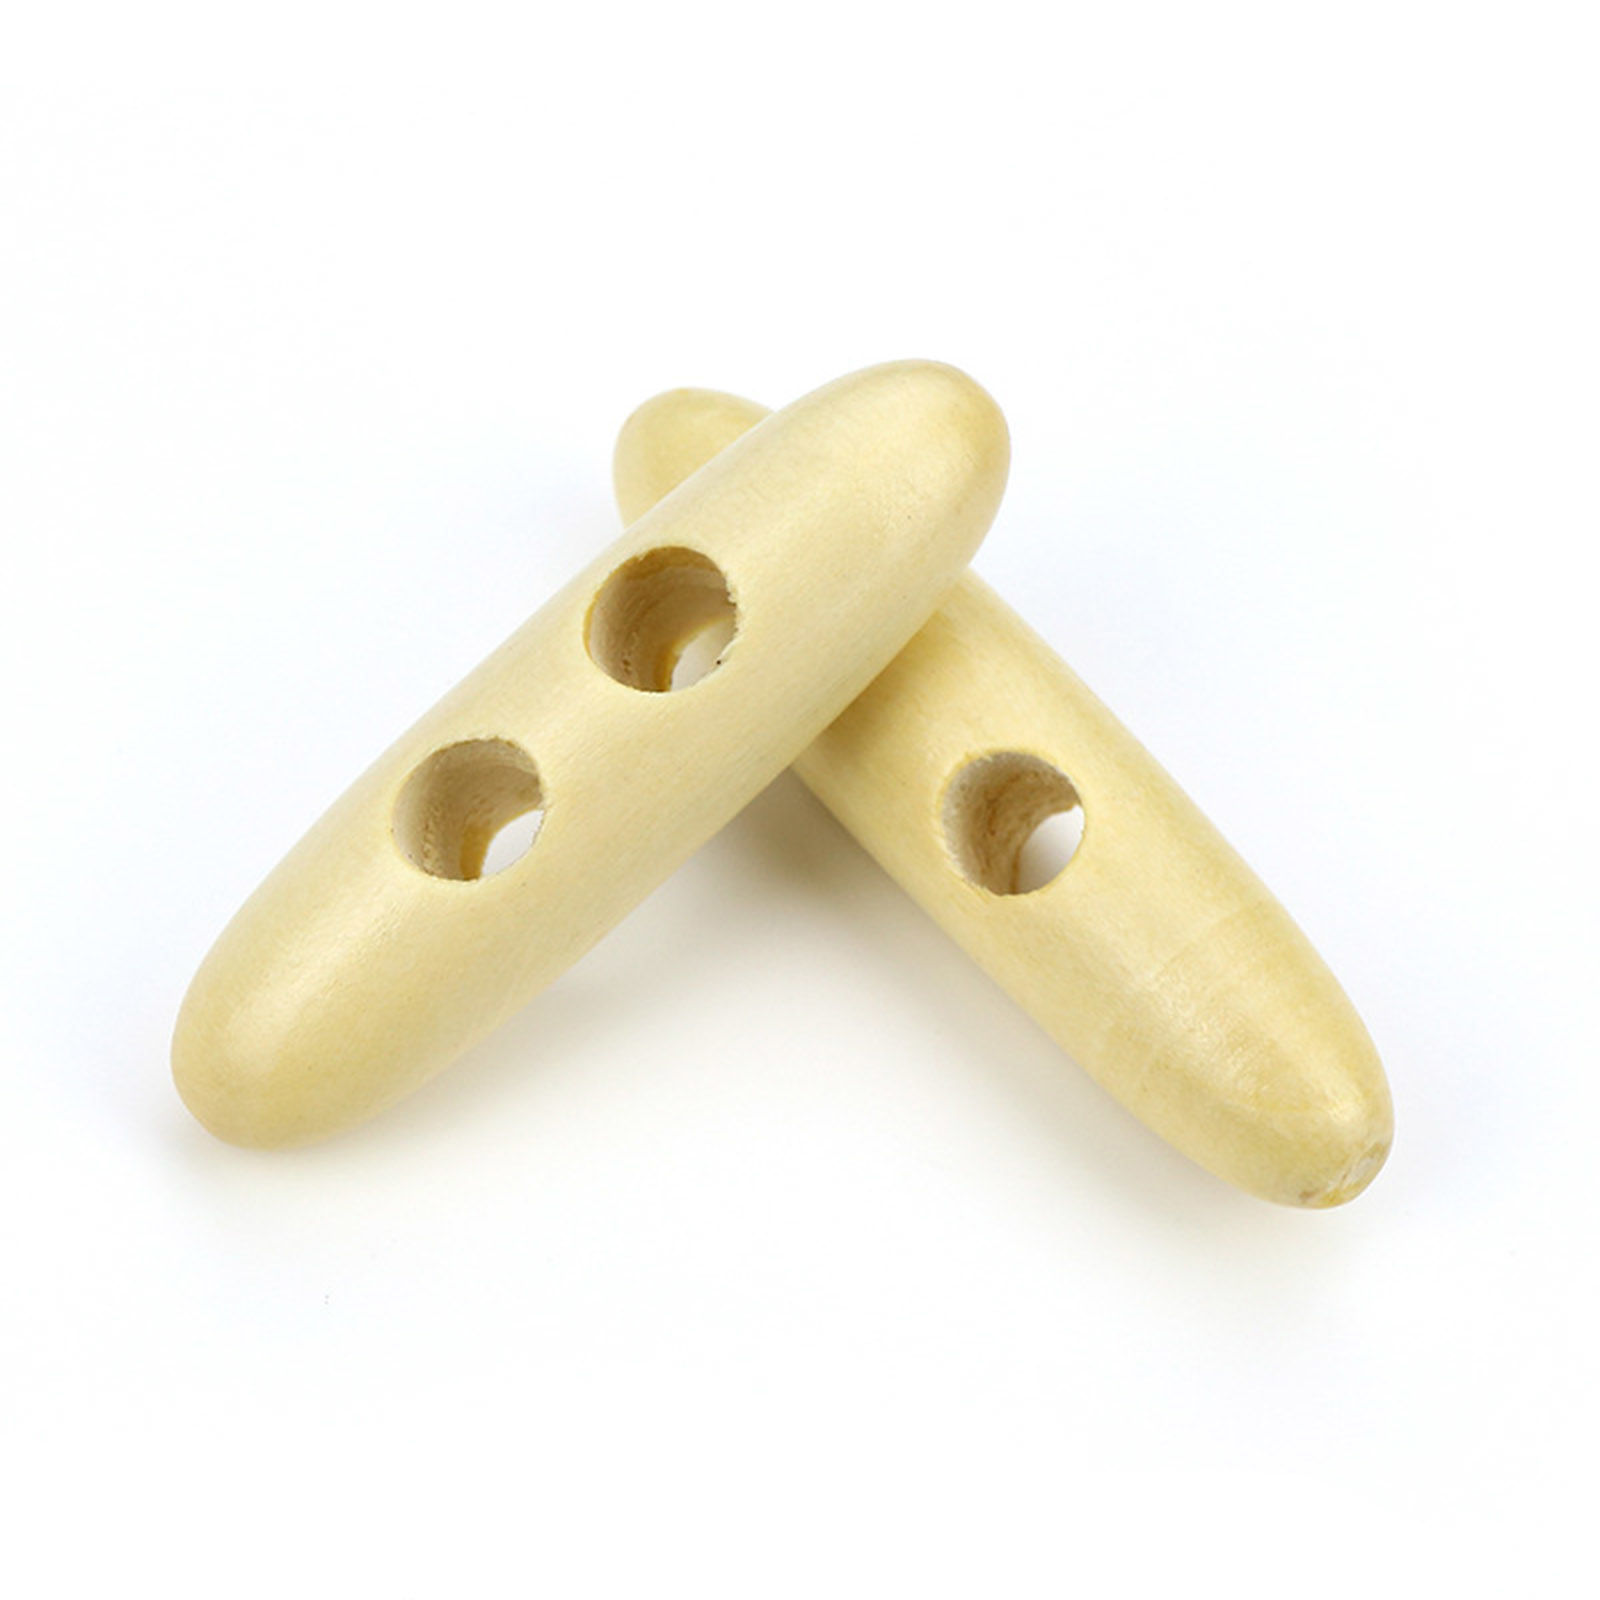 Picture of Wood Horn Buttons Scrapbooking 2 Holes Marquise Natural 5cm long, 50 PCs